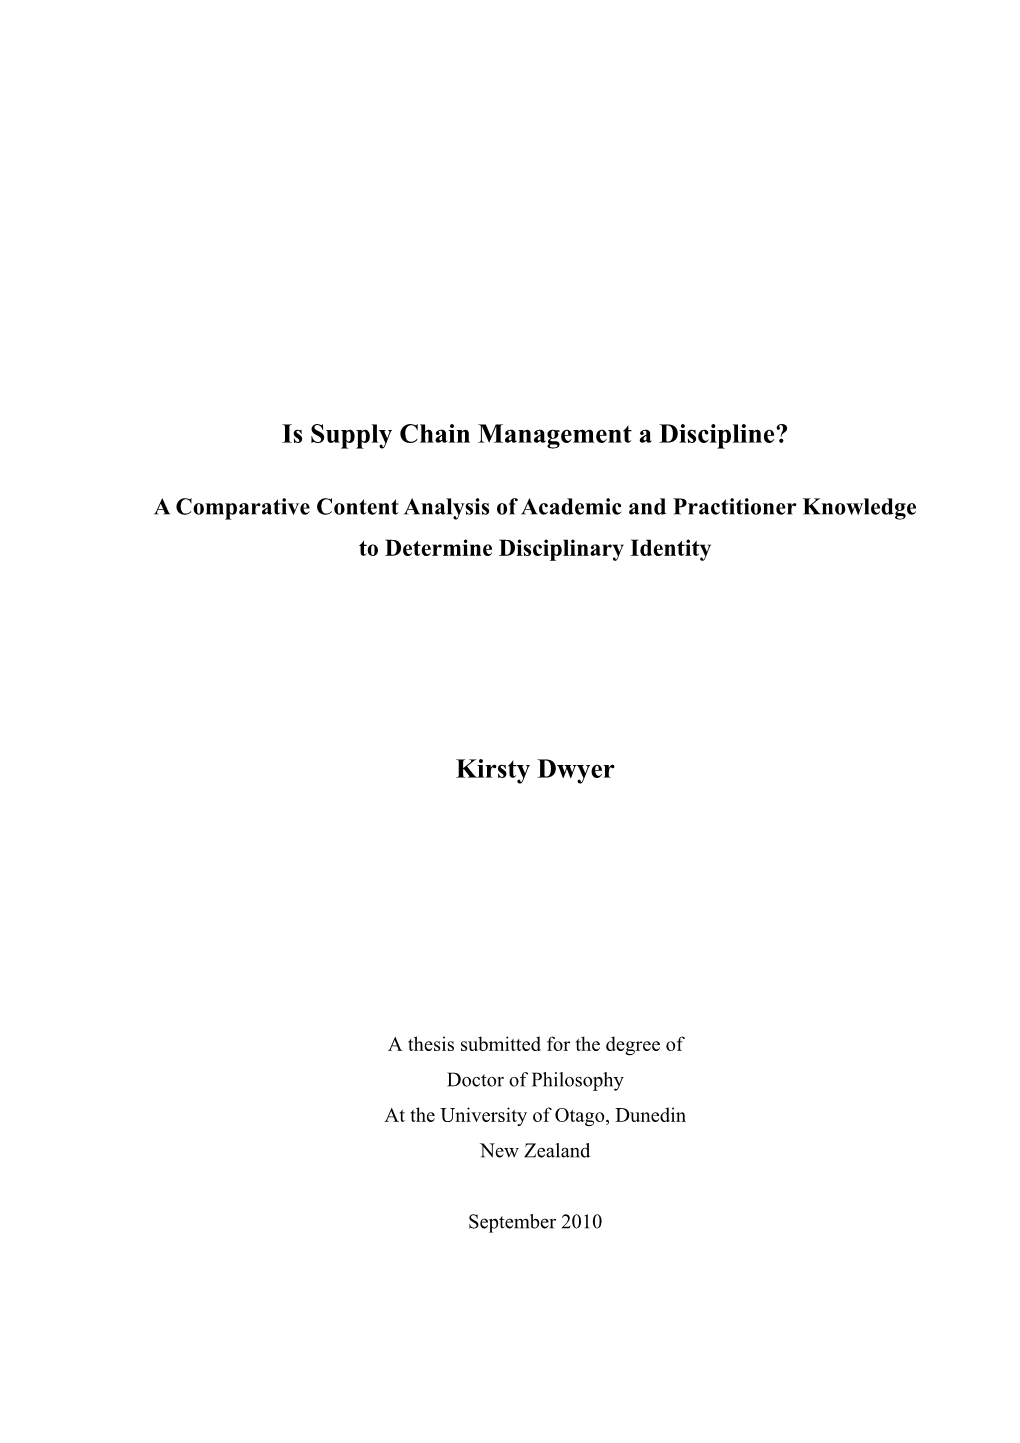 Is Supply Chain Management a Discipline?